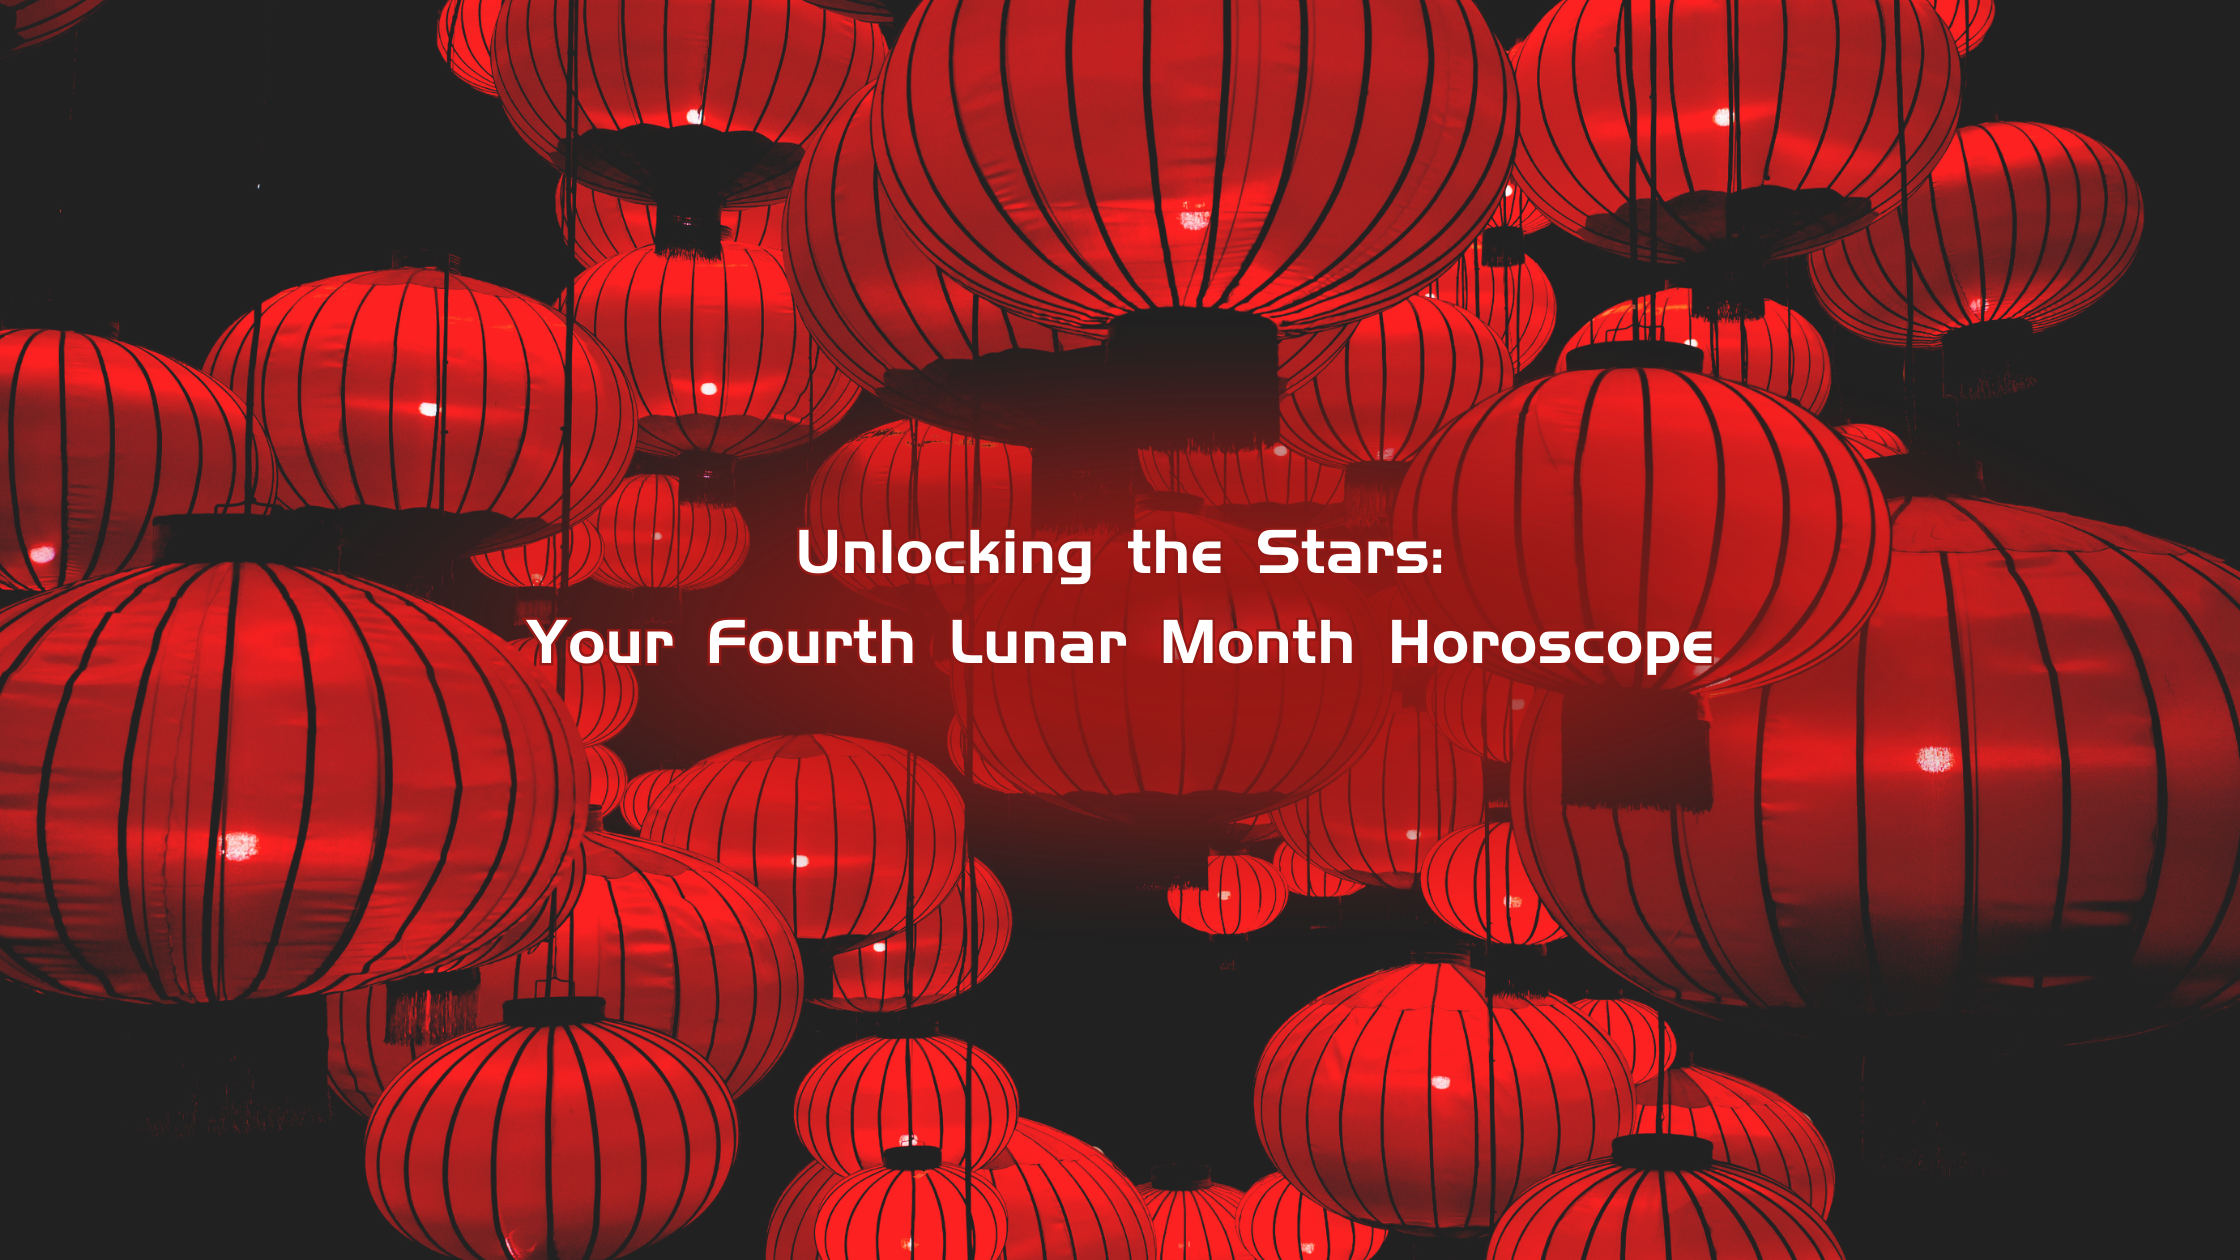 Unlocking the Stars: Your Fourth Lunar Month Horoscope